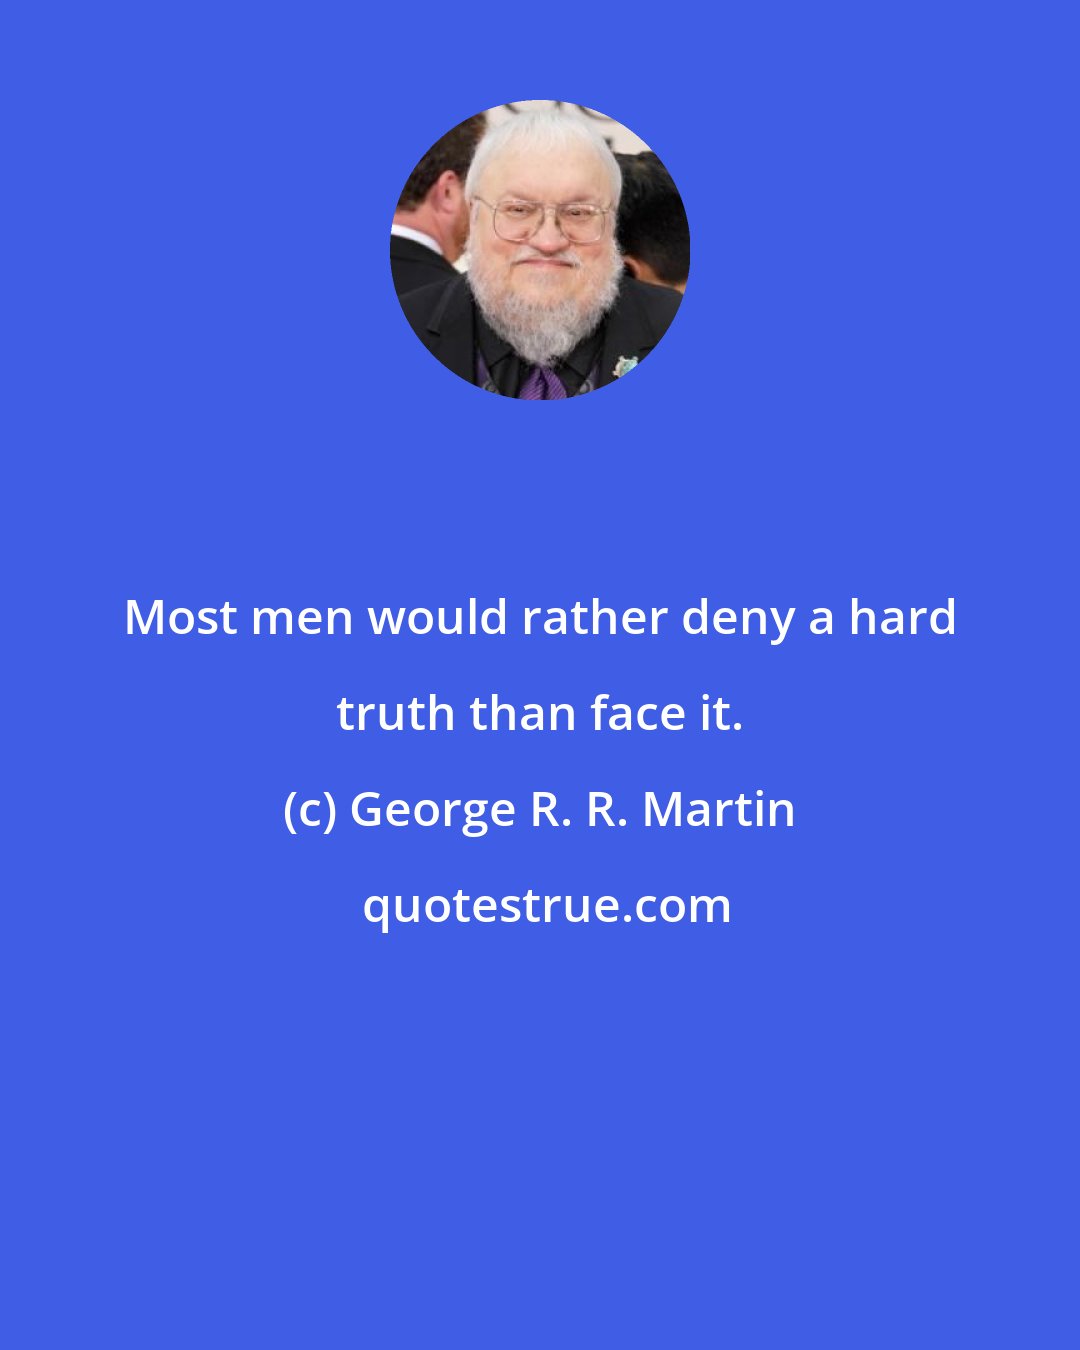 George R. R. Martin: Most men would rather deny a hard truth than face it.